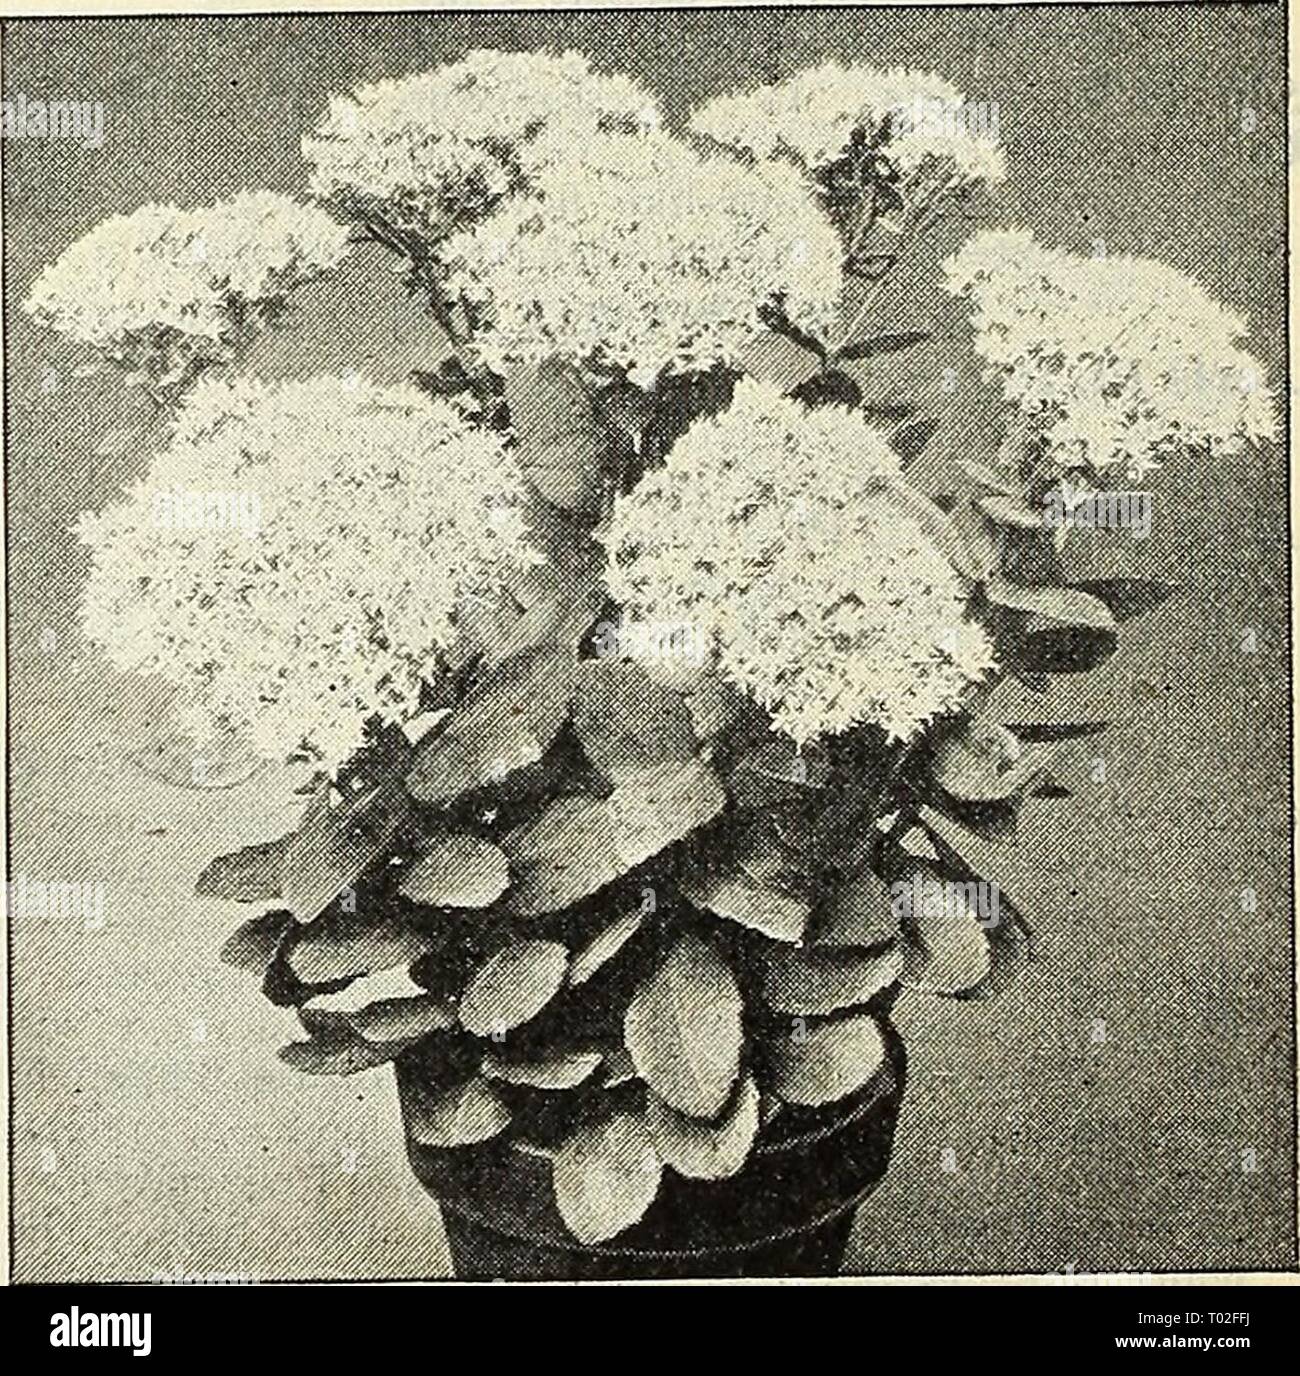 Dreer's garden calendar : 1903 . dreersgardencale1903henr Year: 1903  Senecio Pulcher. Saxifraga Pyramidalis SCABIOSA. Caucasica. One of the handsomest per- ennials we possess, and should be grown in every garden, if only for cutting pur- poses, lasting a long time when placed in water. The flowers are of a peculiarly soft and charming shade of lilac-blue, and commences to bloom in June, throwing stems 15 to 18 inches high until September. SEDUM (Stone-crop). The dwarf or creeping varieties are suit- able for rock-work, covering graves, dry, sunny banks and carpet bedding, while the taller spe Stock Photo